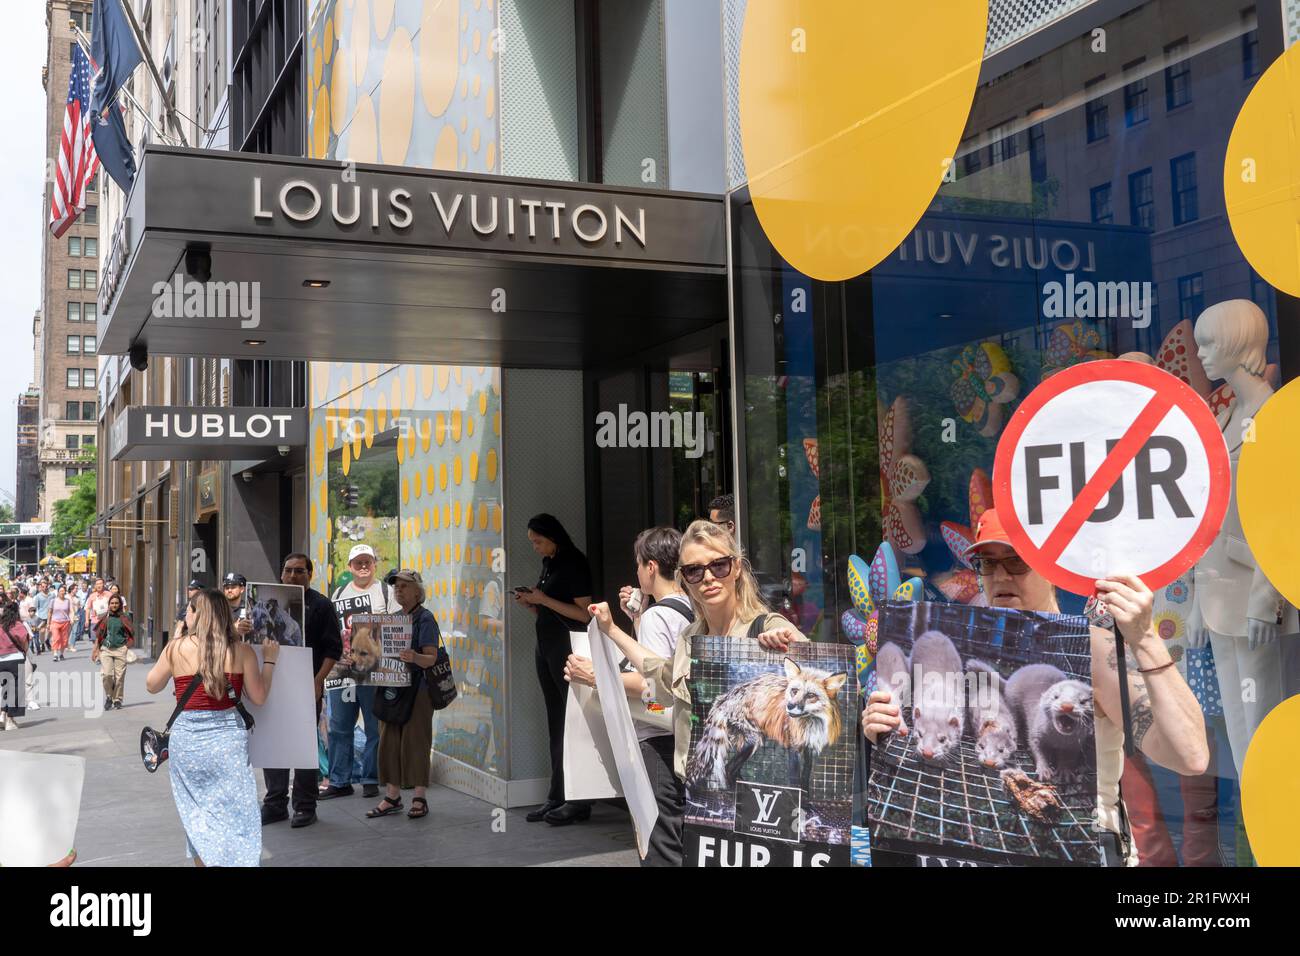 ⁴ᴷ⁶⁰ Walking Tour of the Louis Vuitton Fifth Avenue Store, NYC